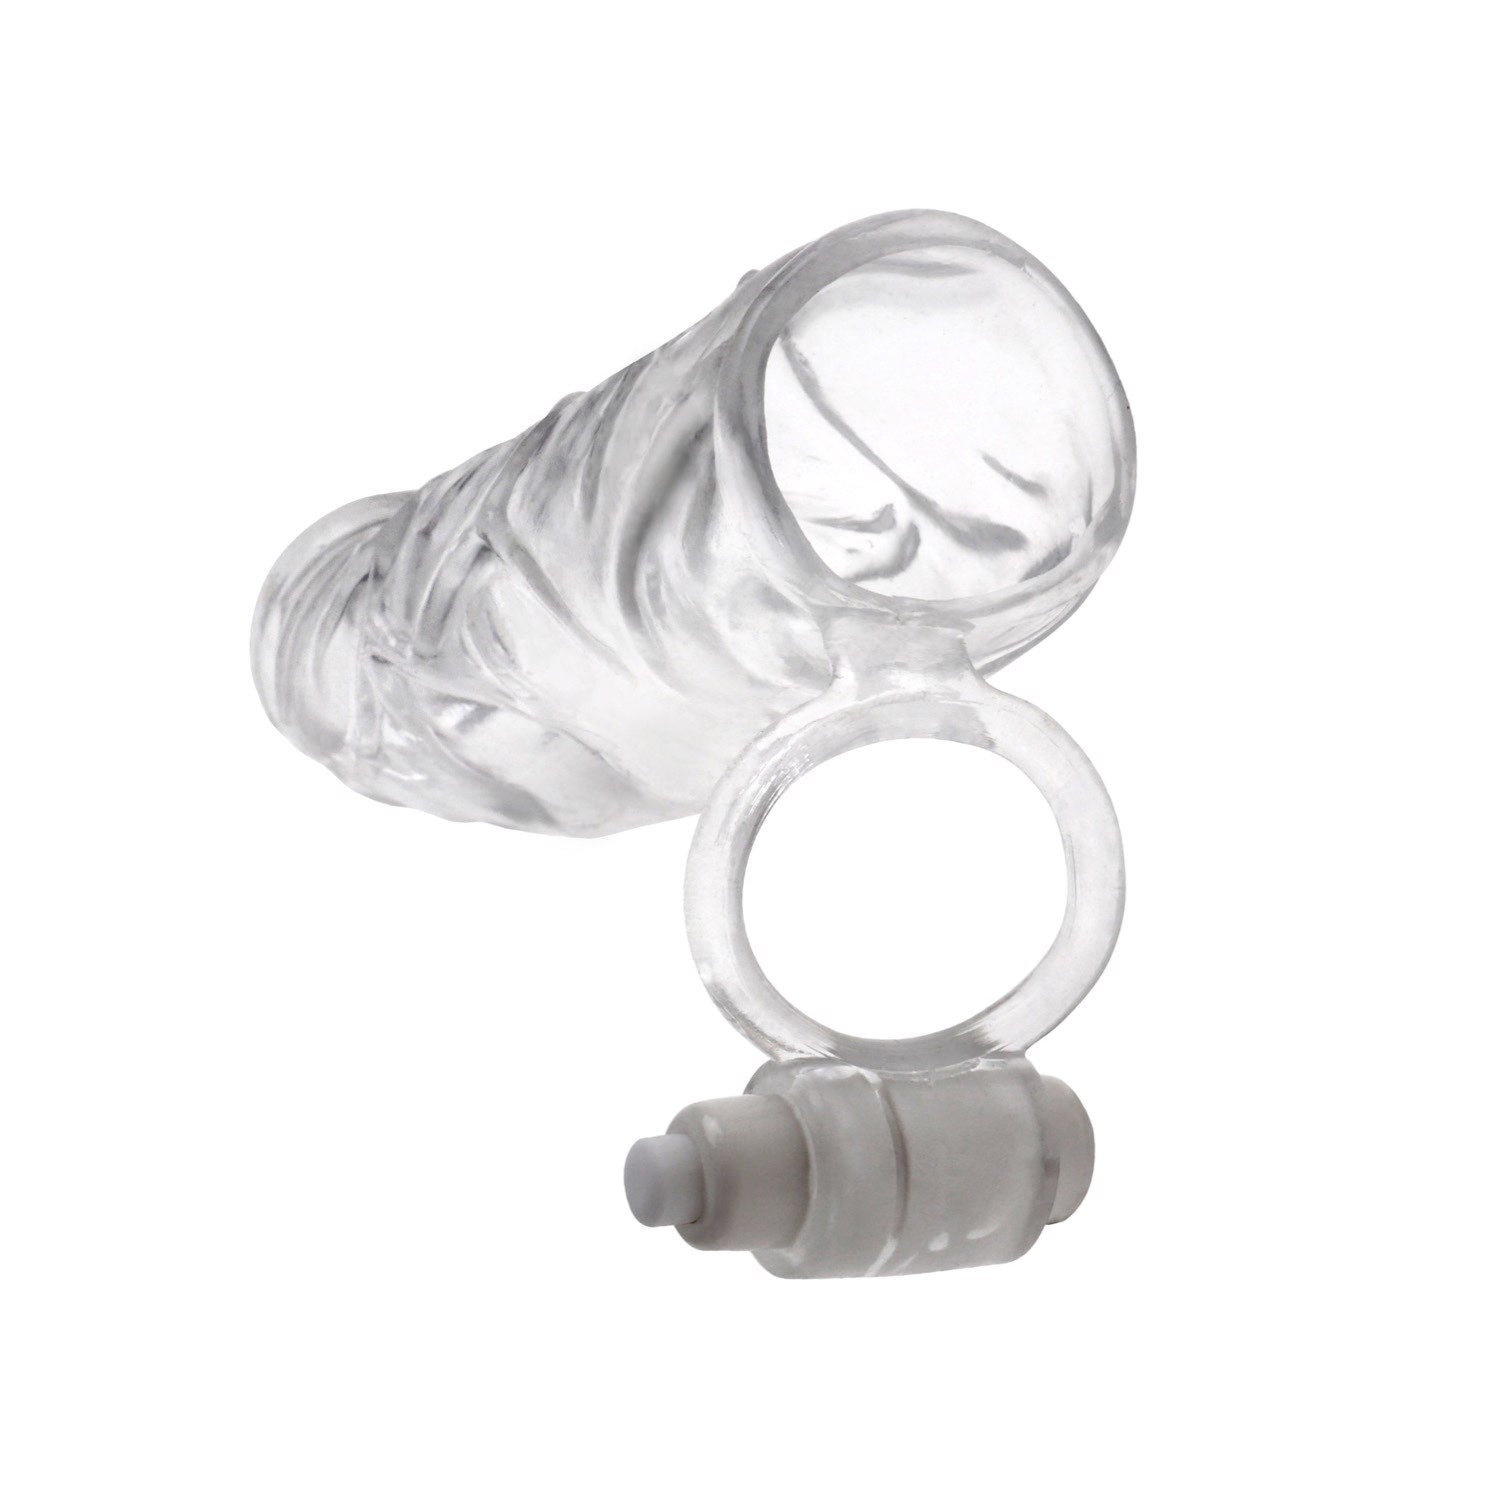 Fantasy X-Tensions Vibrating Super Sleeve - Clear Penis Extension Sleeve with Vibrating Ball Strap by Pipedream